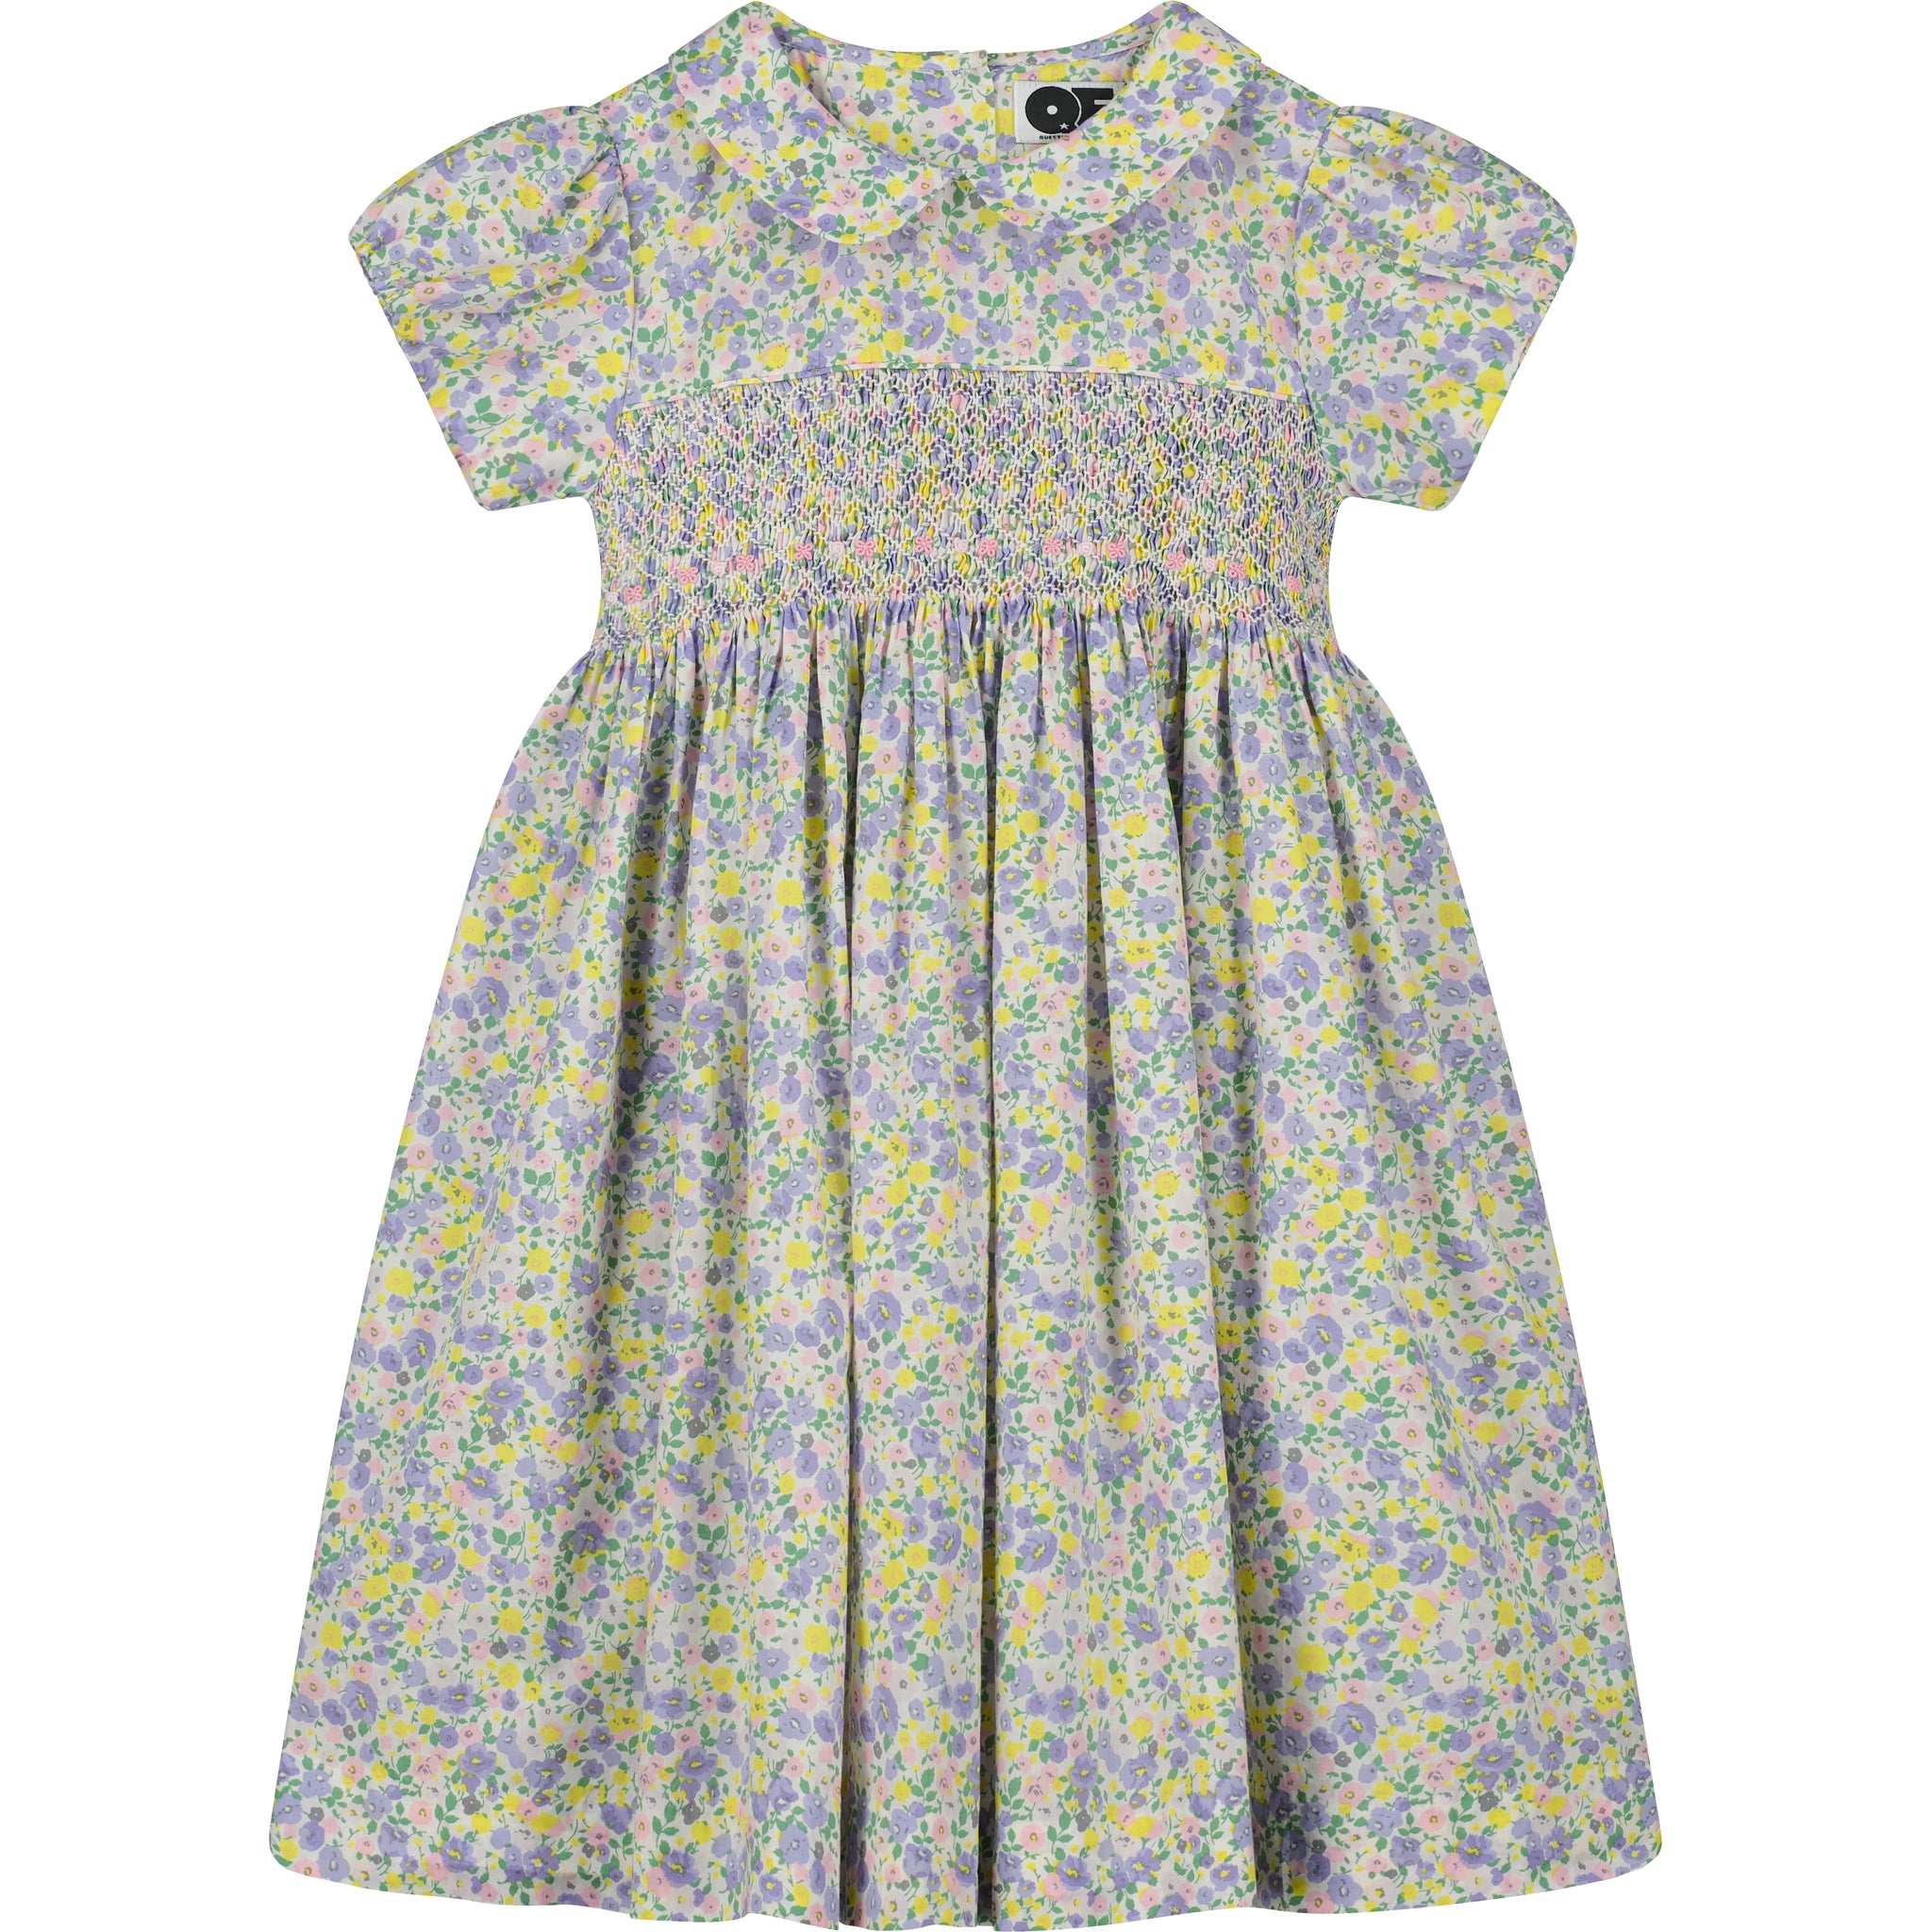 Floral dress with hand smocking, yellow, purple and white, front